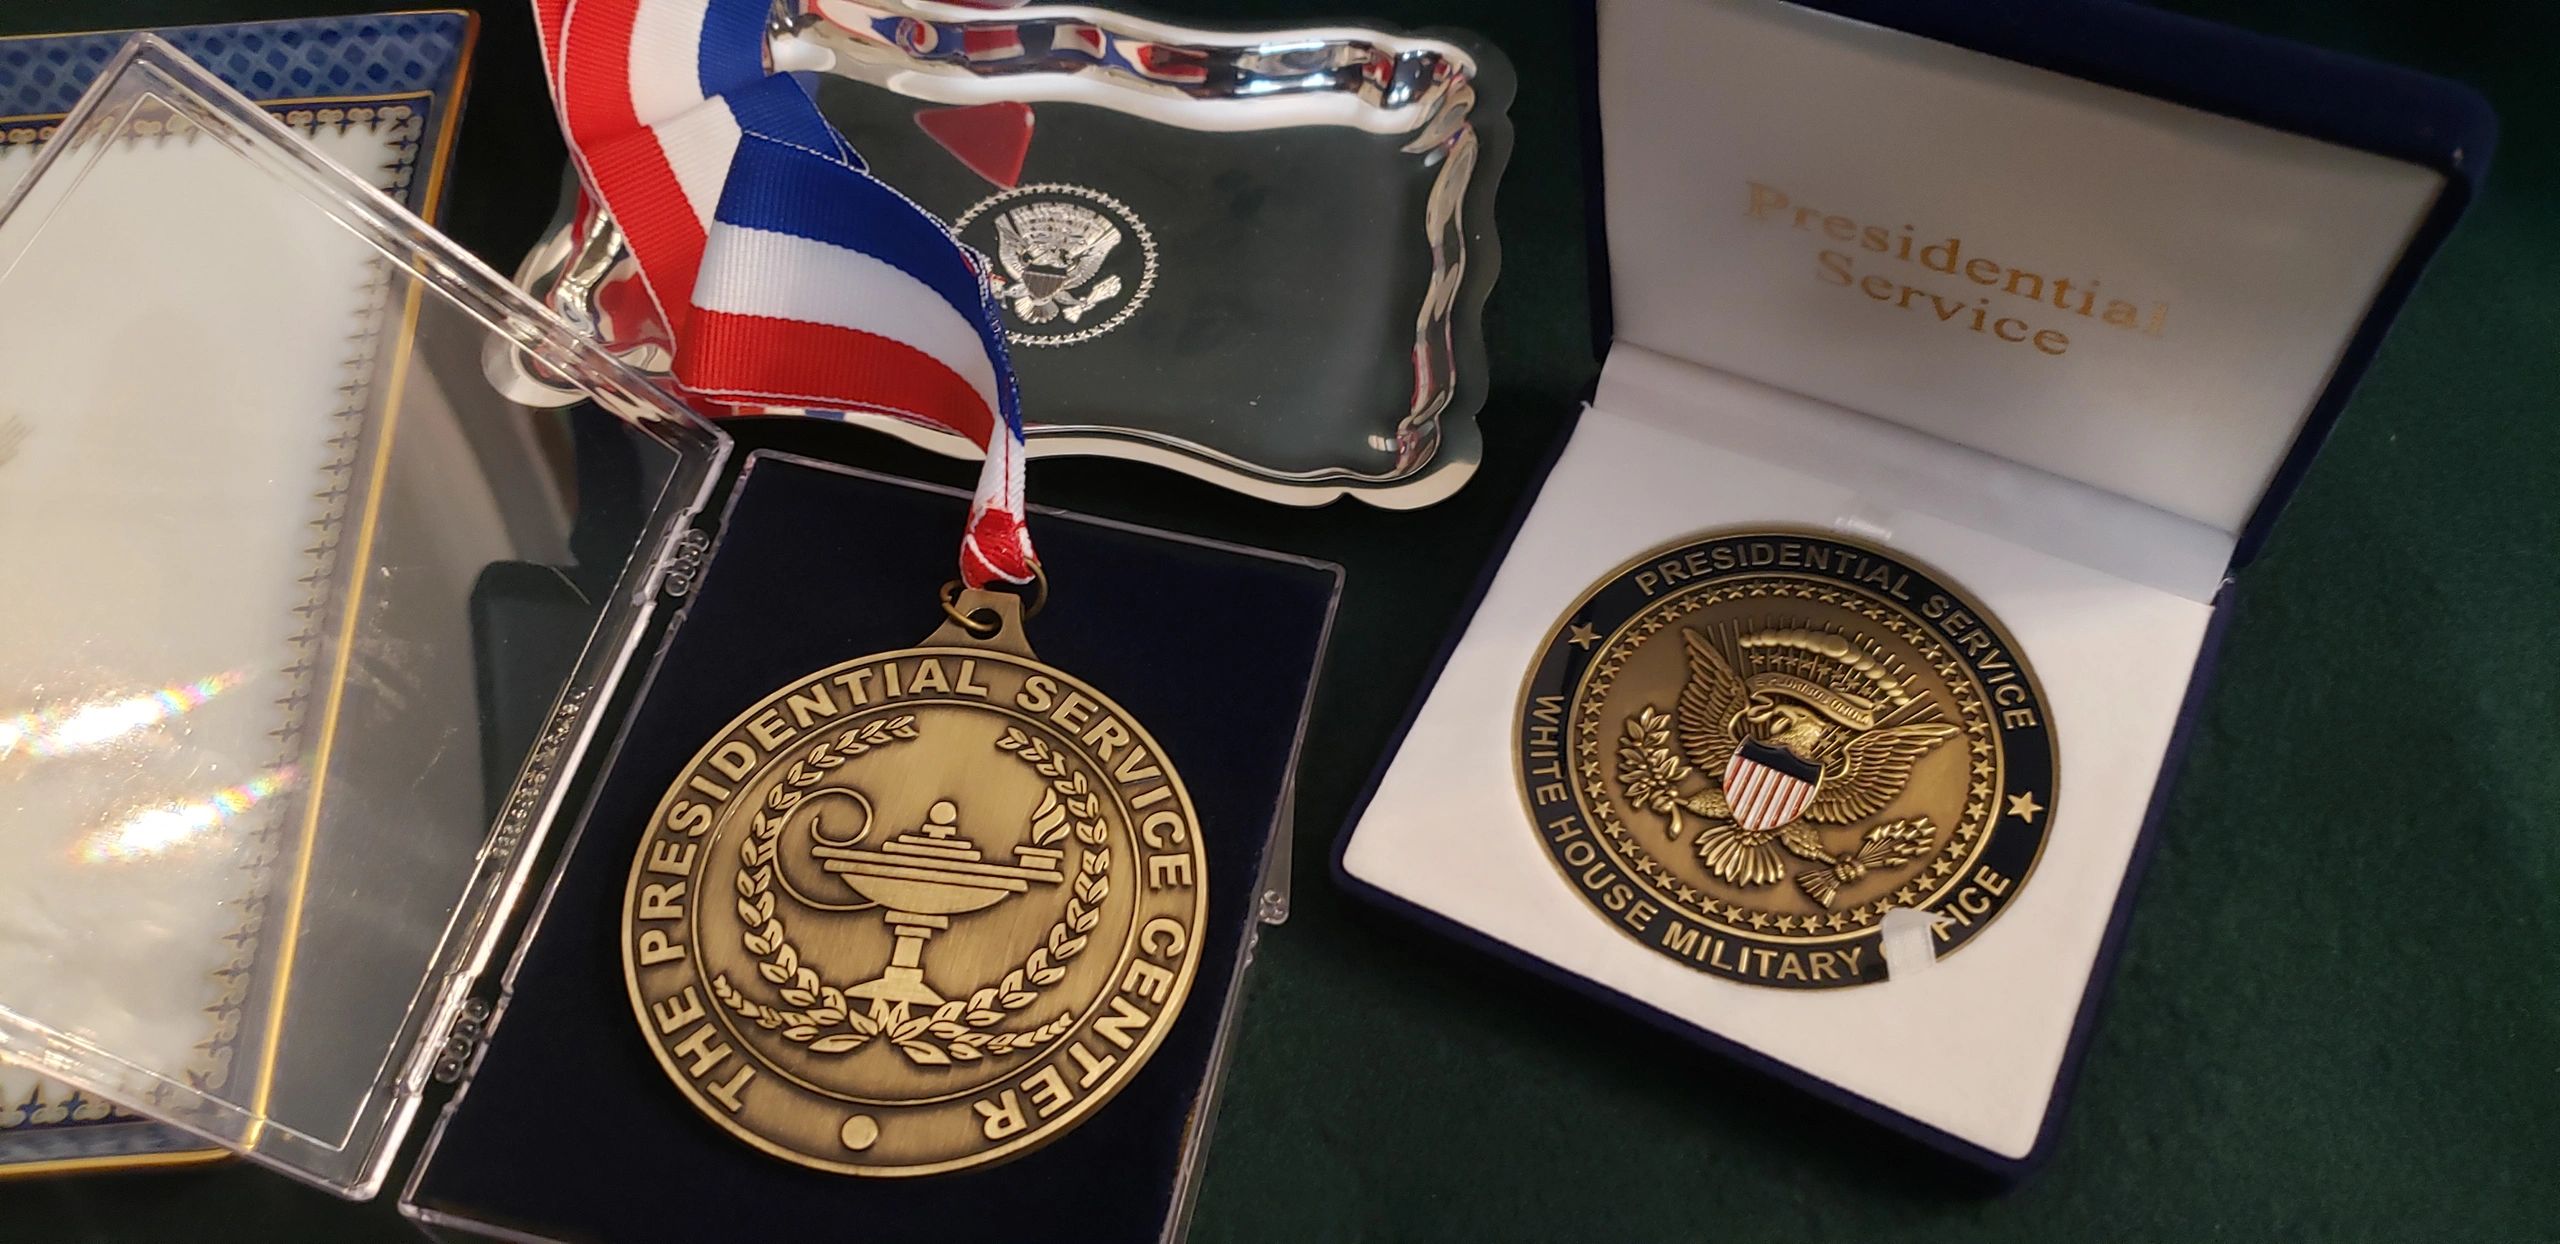 A picture of a gold medal and a gold-colored coin from the US Presidential Service Center.